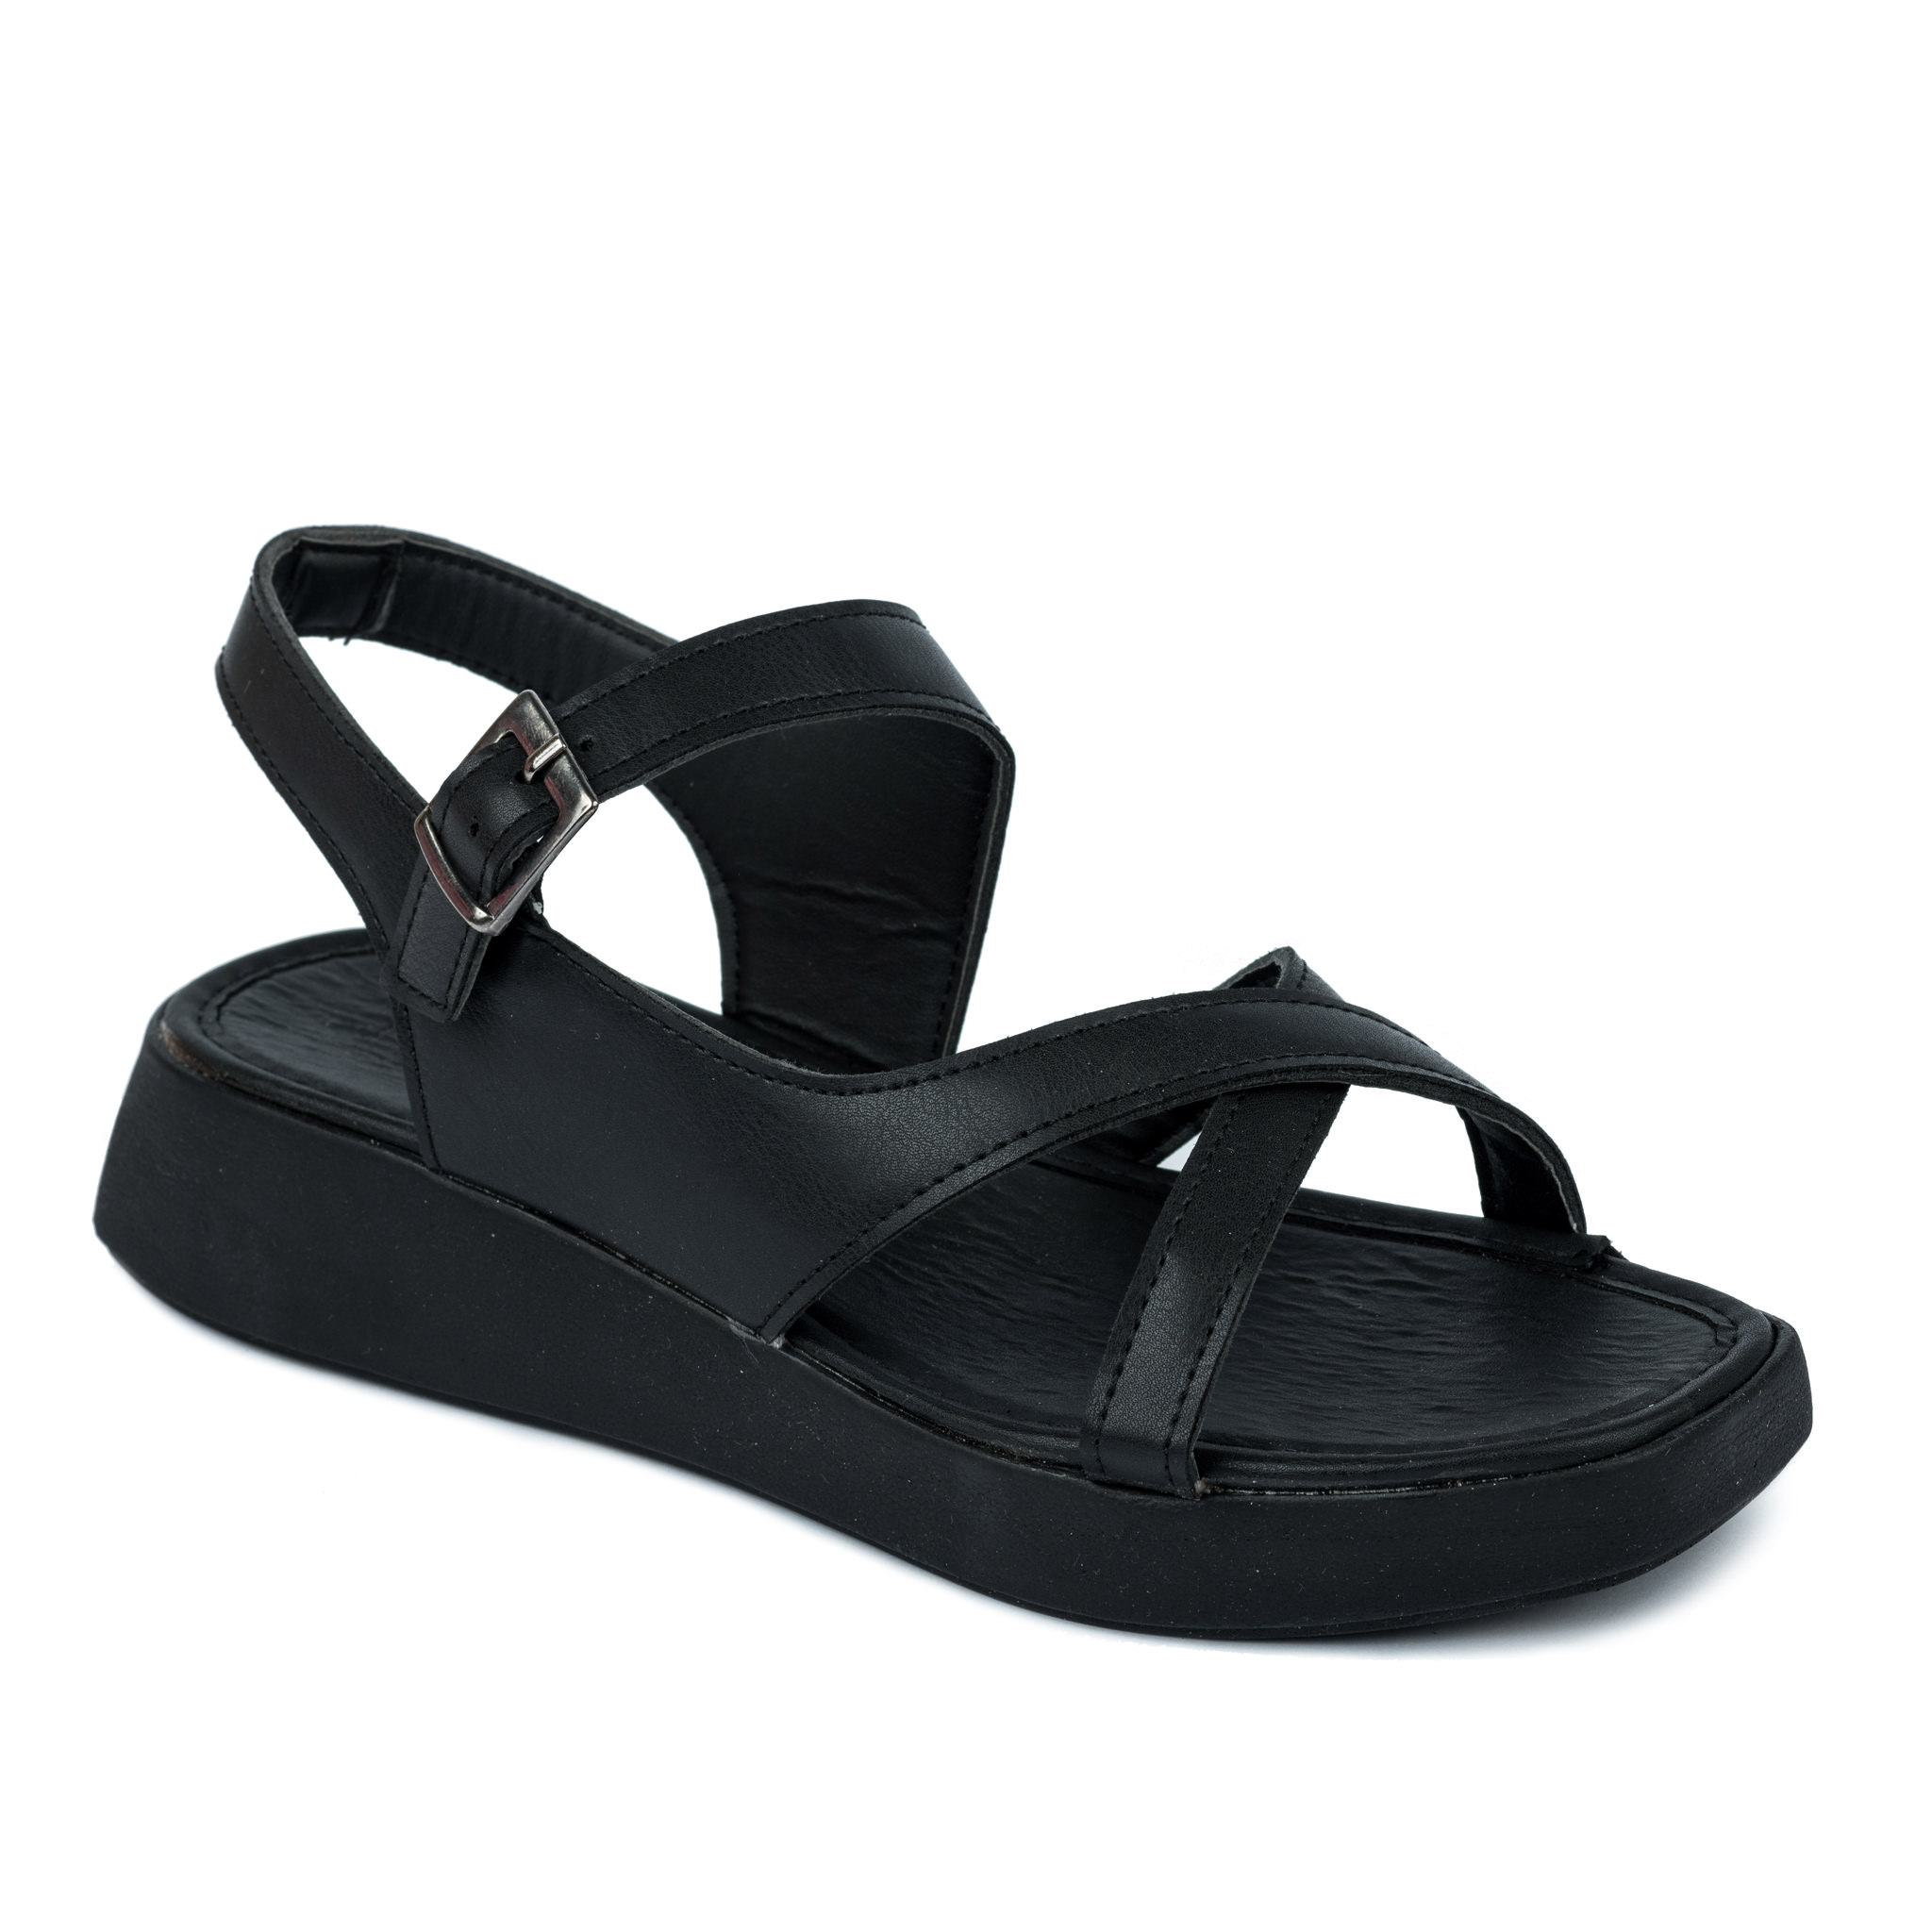 CROSS STRAP SANDALS WITH BELTS - BLACK